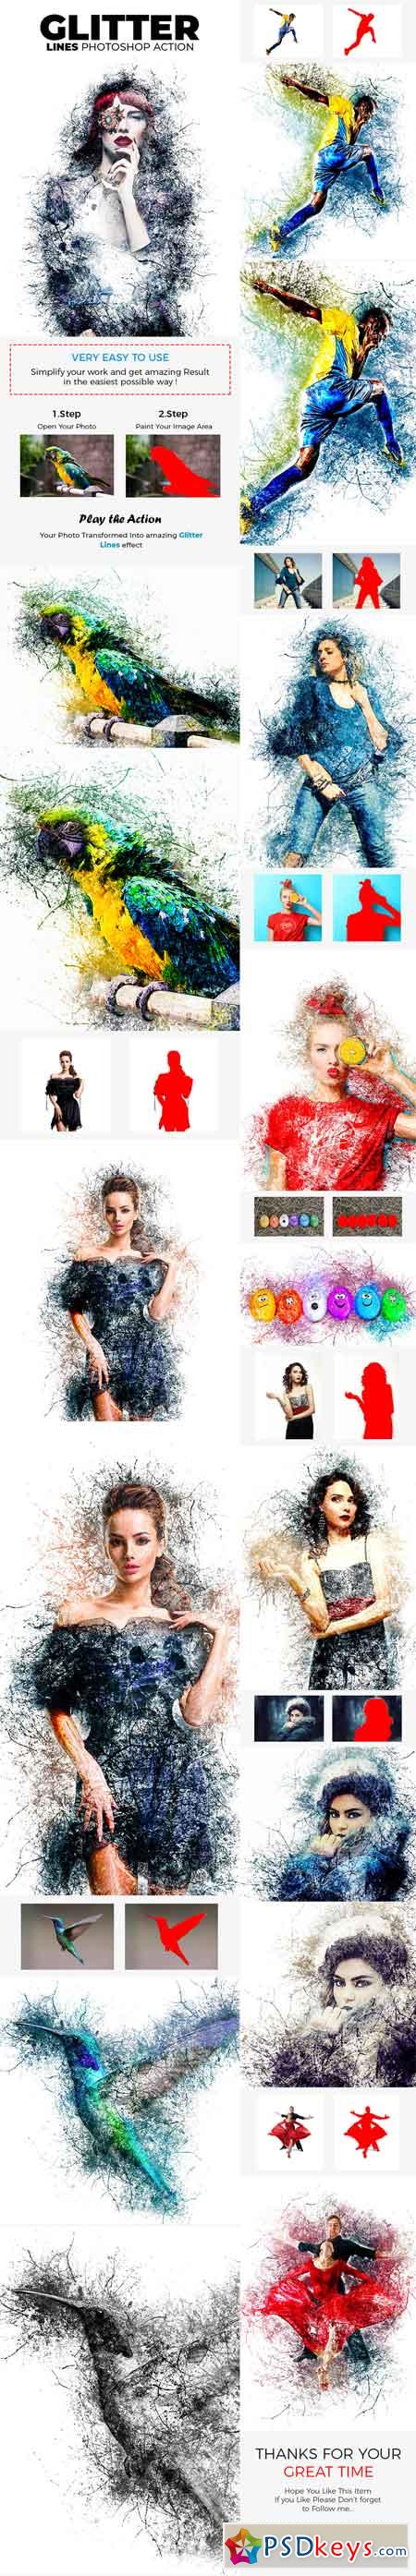 Glitter Lines Photoshop Action 21633519